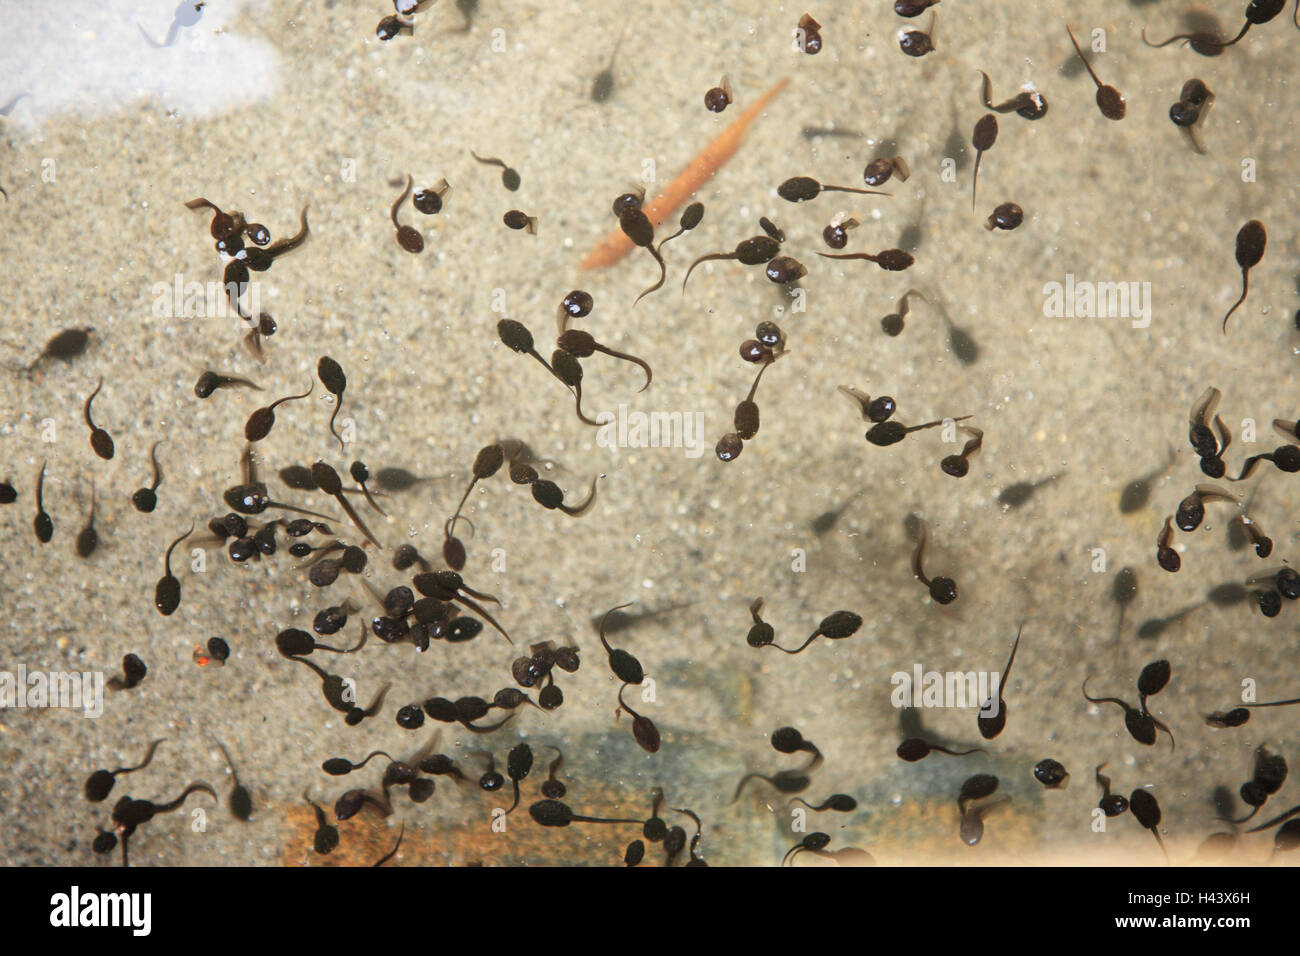 Water, tadpoles, from above, waters, animals, amphibians, Amphibians, frog Amphibians, Ranidae, frogs, larva stage, larvae, development stage, development, spring, Stock Photo